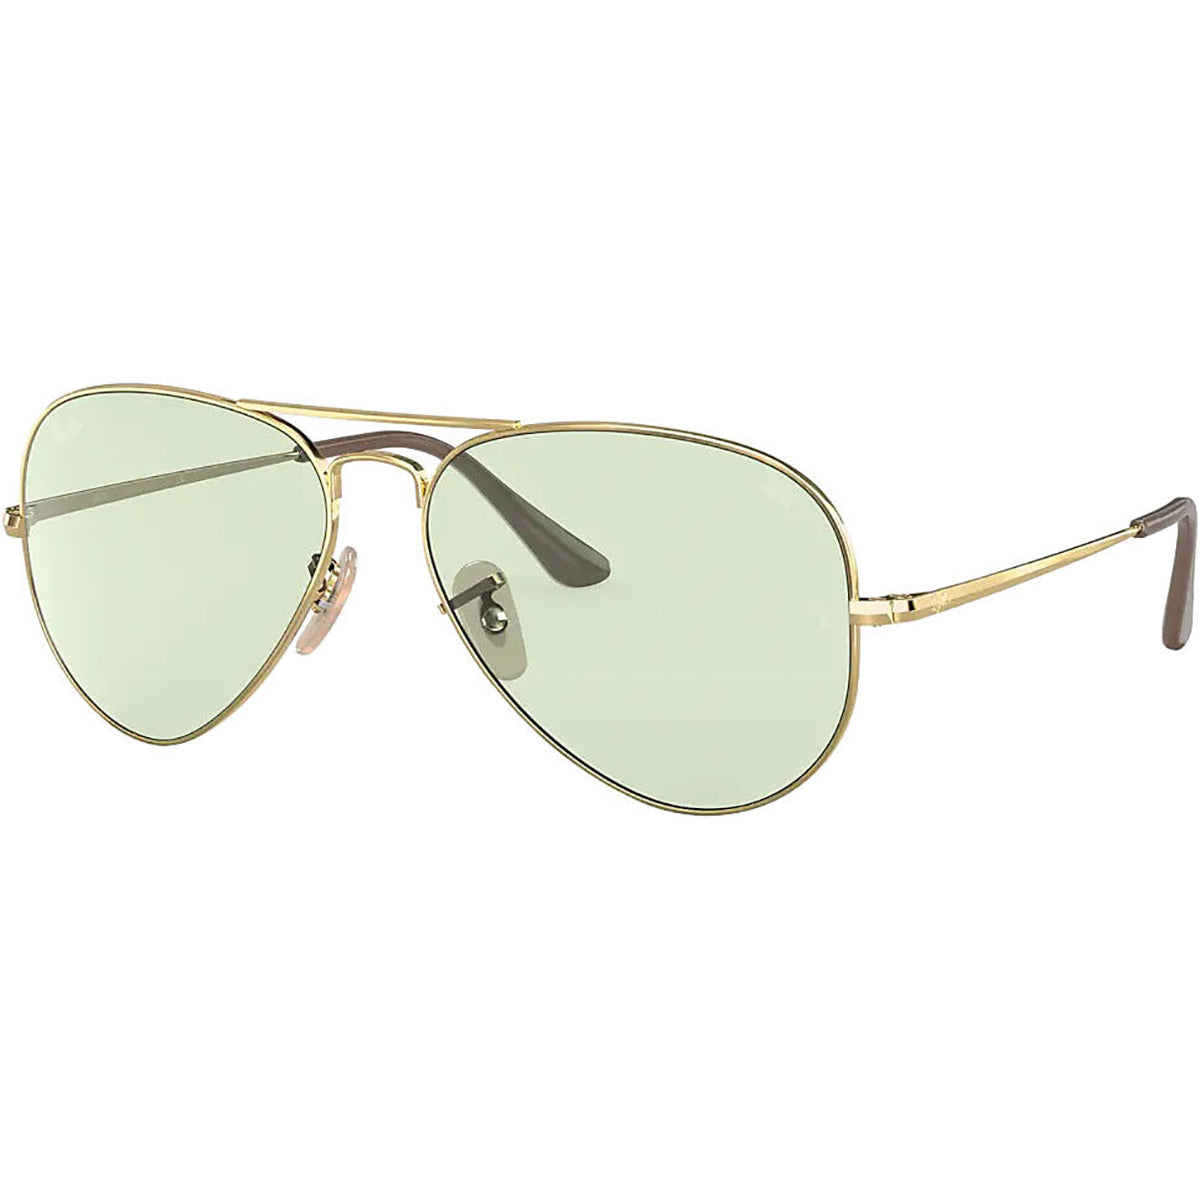 Ray-Ban RB3689 Solid Evolve Adult Aviator Sunglasses-0RB3689